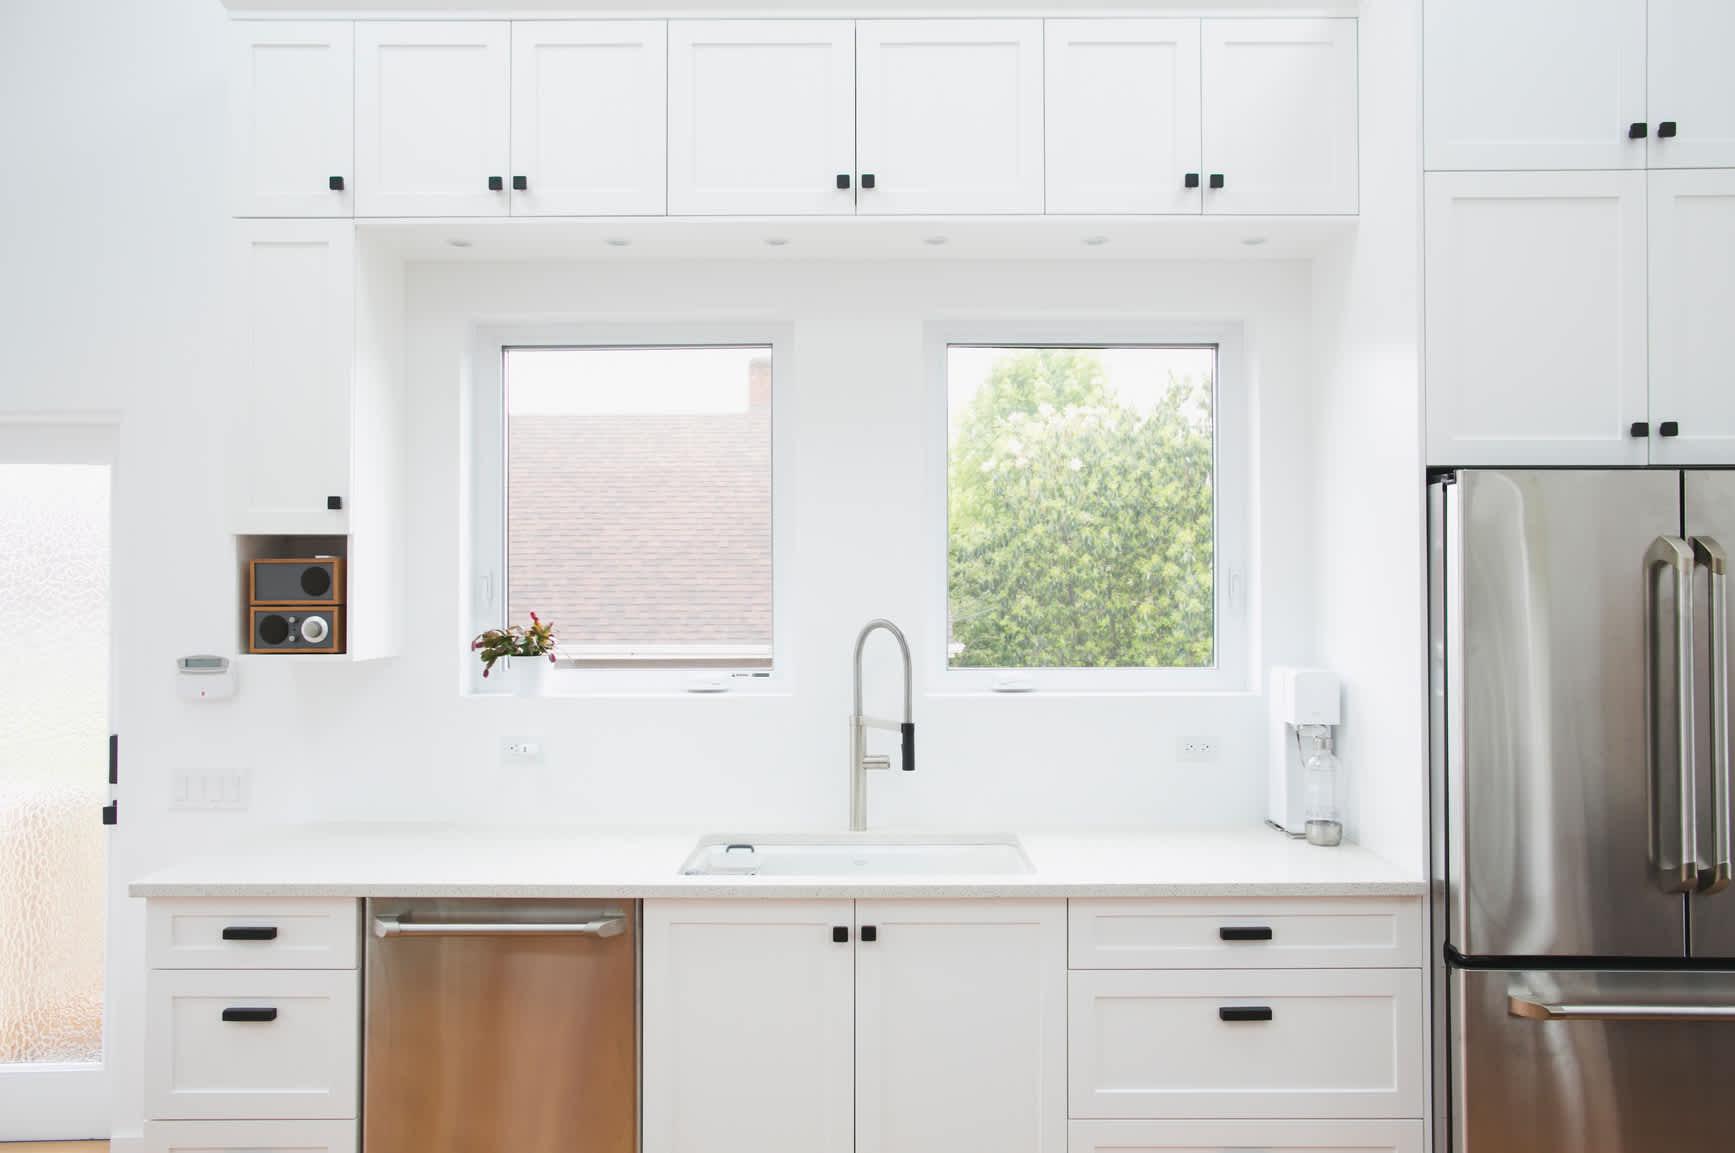 NAHB: Millennials Want White Cabinets and Stainless Steel